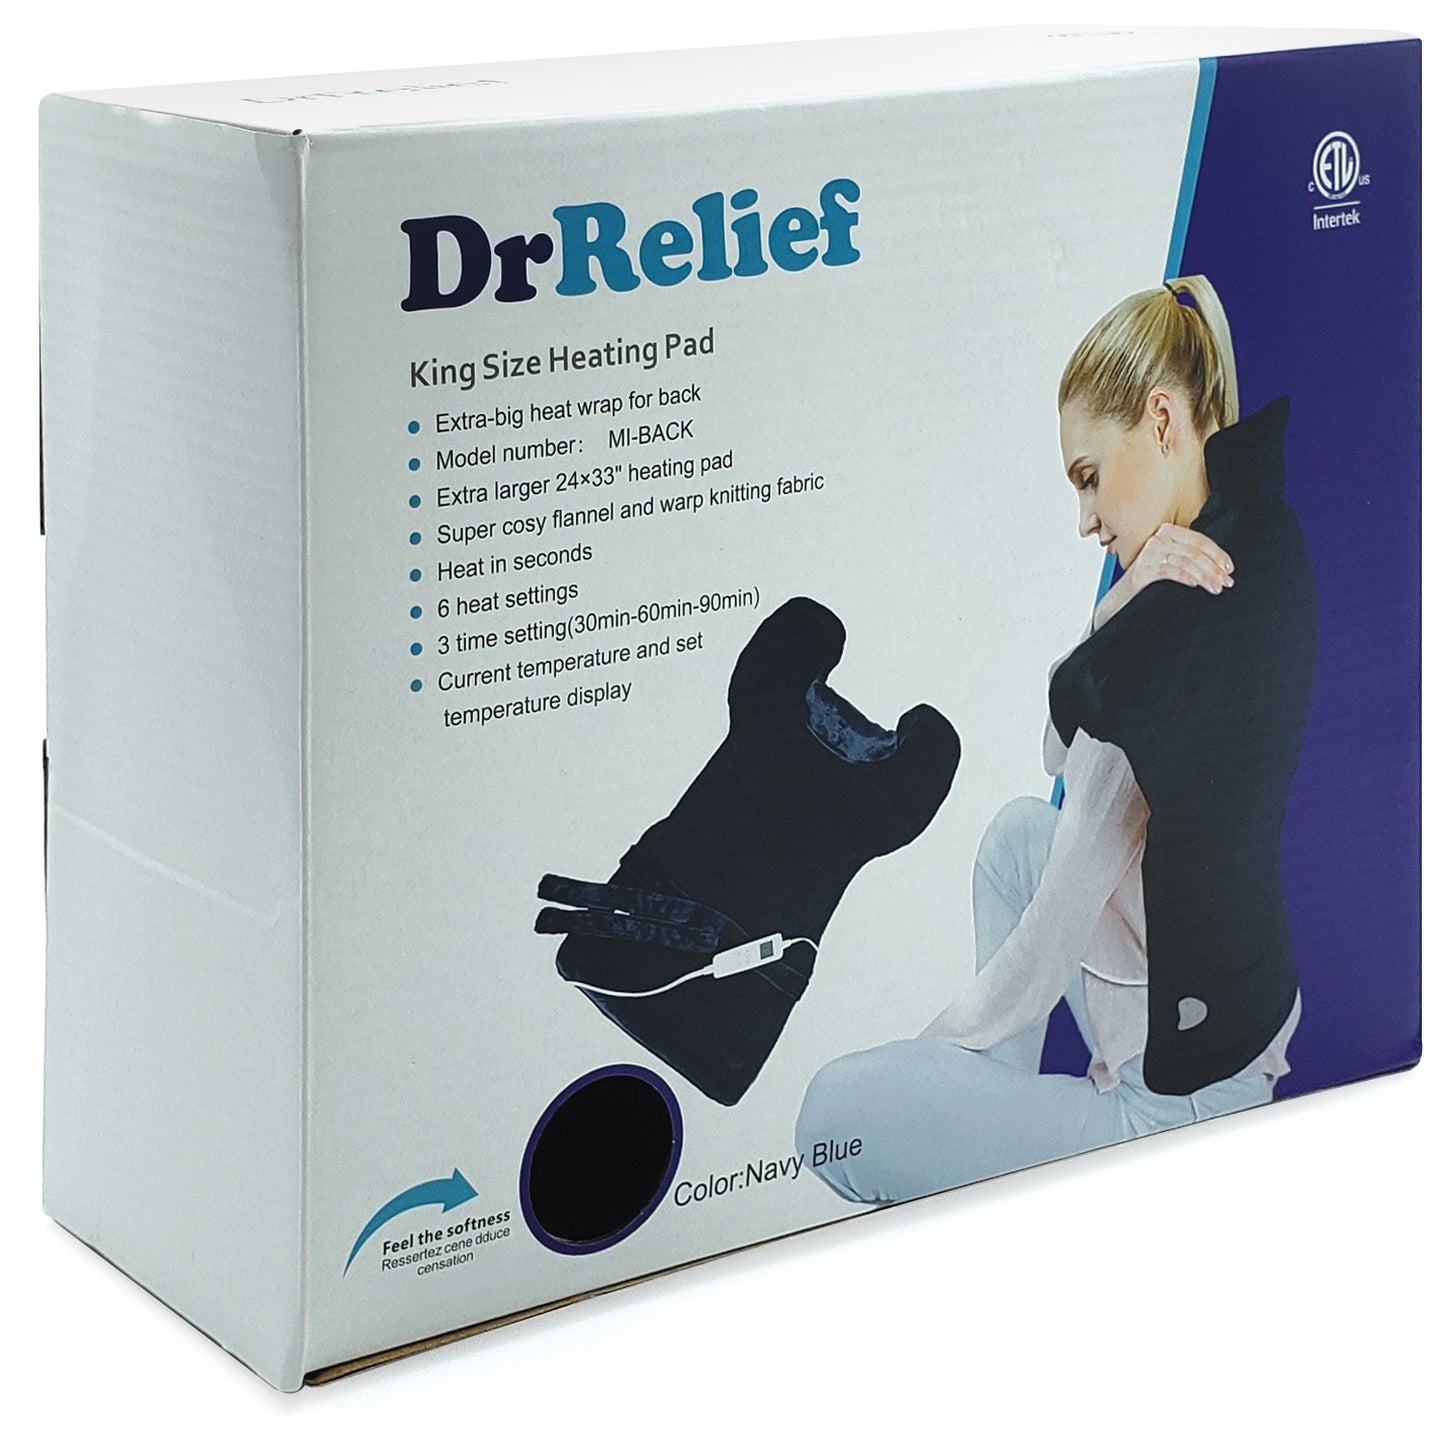 Dr Relief by SUNAID Extra Large Full Back Shoulders and Neck Heating Pad 24" x 33" Fast Heating Wrap with Auto Shut Off for Back, Neck and Shoulder, Abdomen, Waist Pain Relief, Dry/Moist Option (Navy)